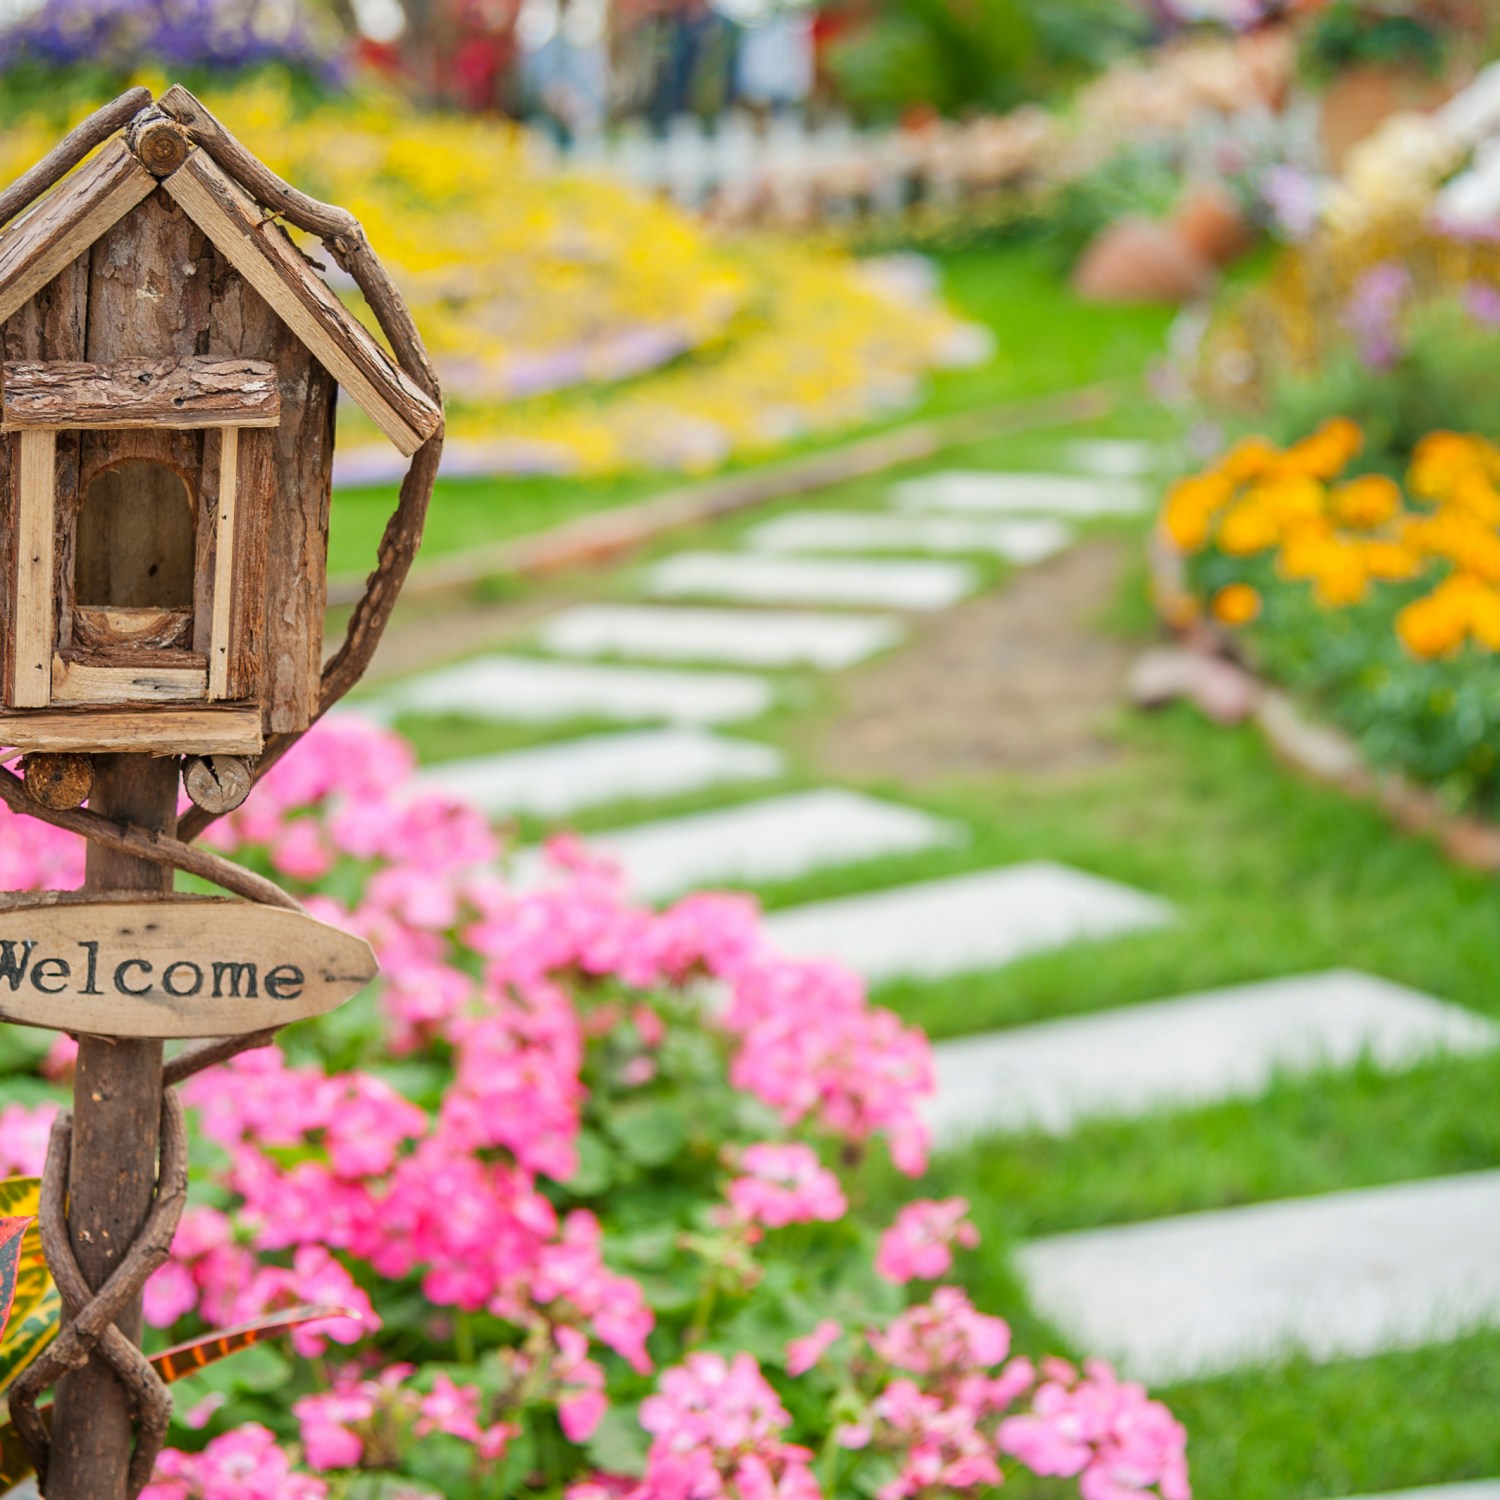 welcome yard sign on a small birdhouse in colorful landscaped garden in maintained yard of a home